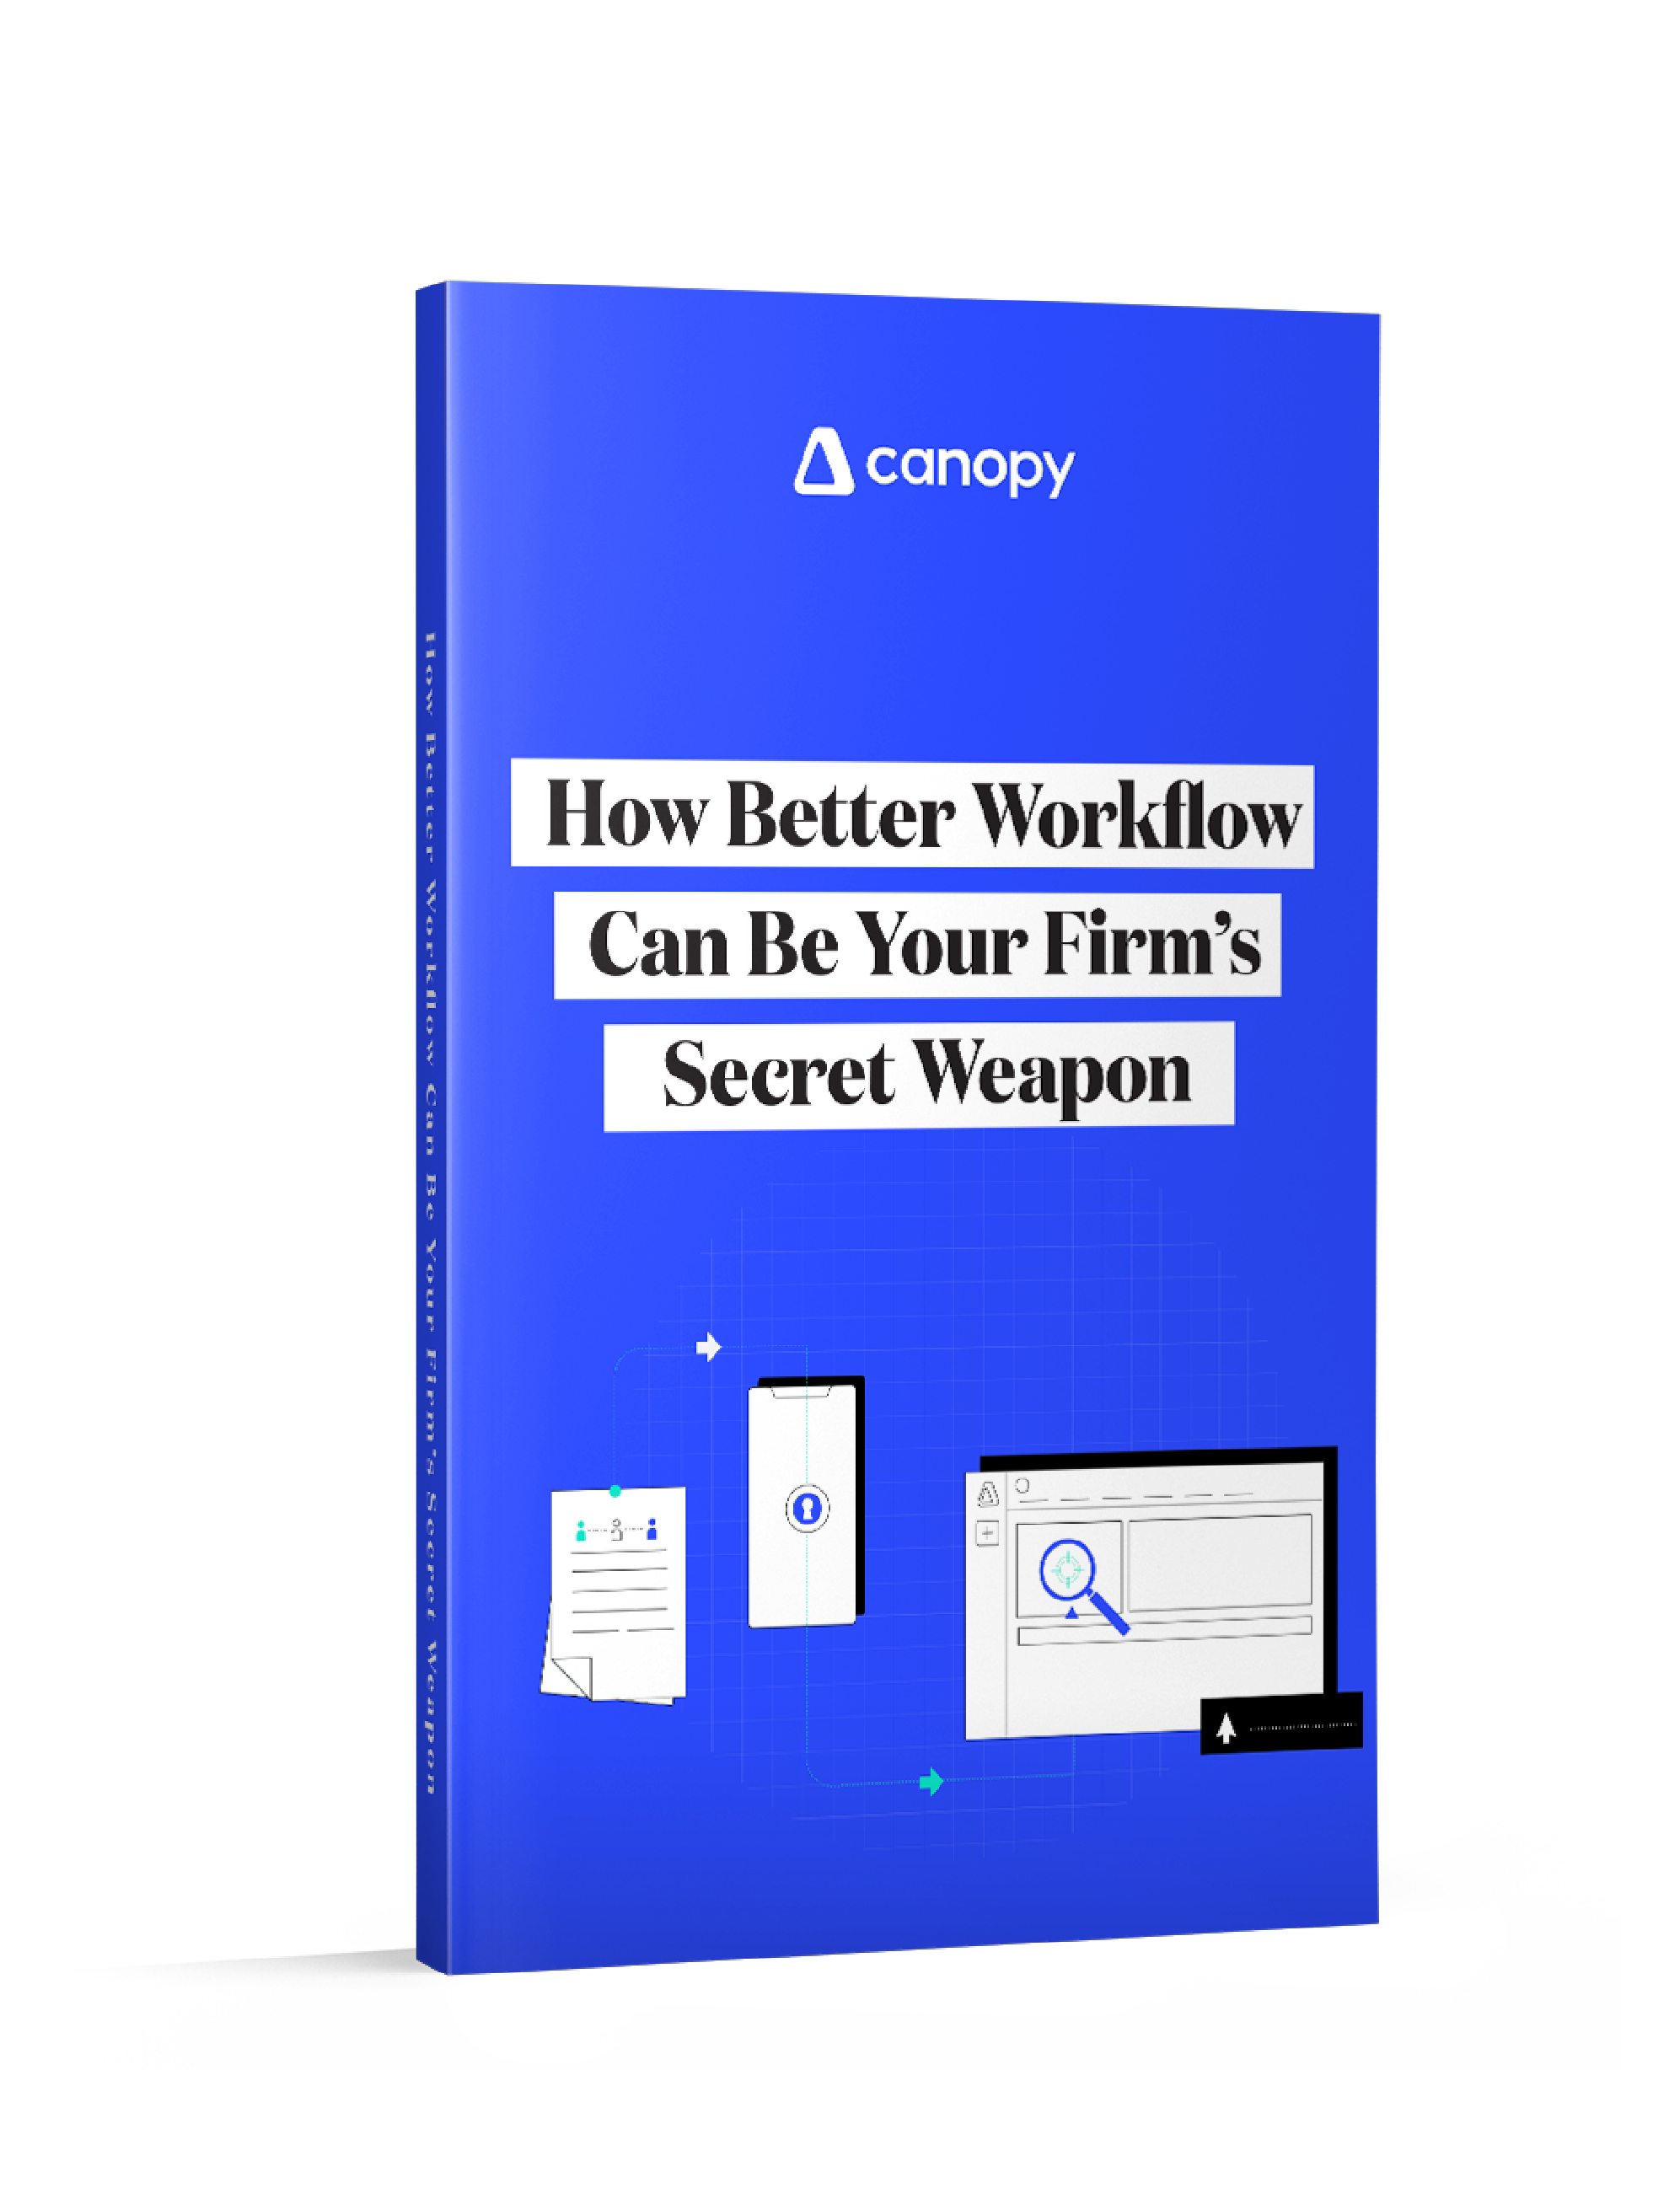 How Better Workflow Can Be Your Firm's Secret Weapon